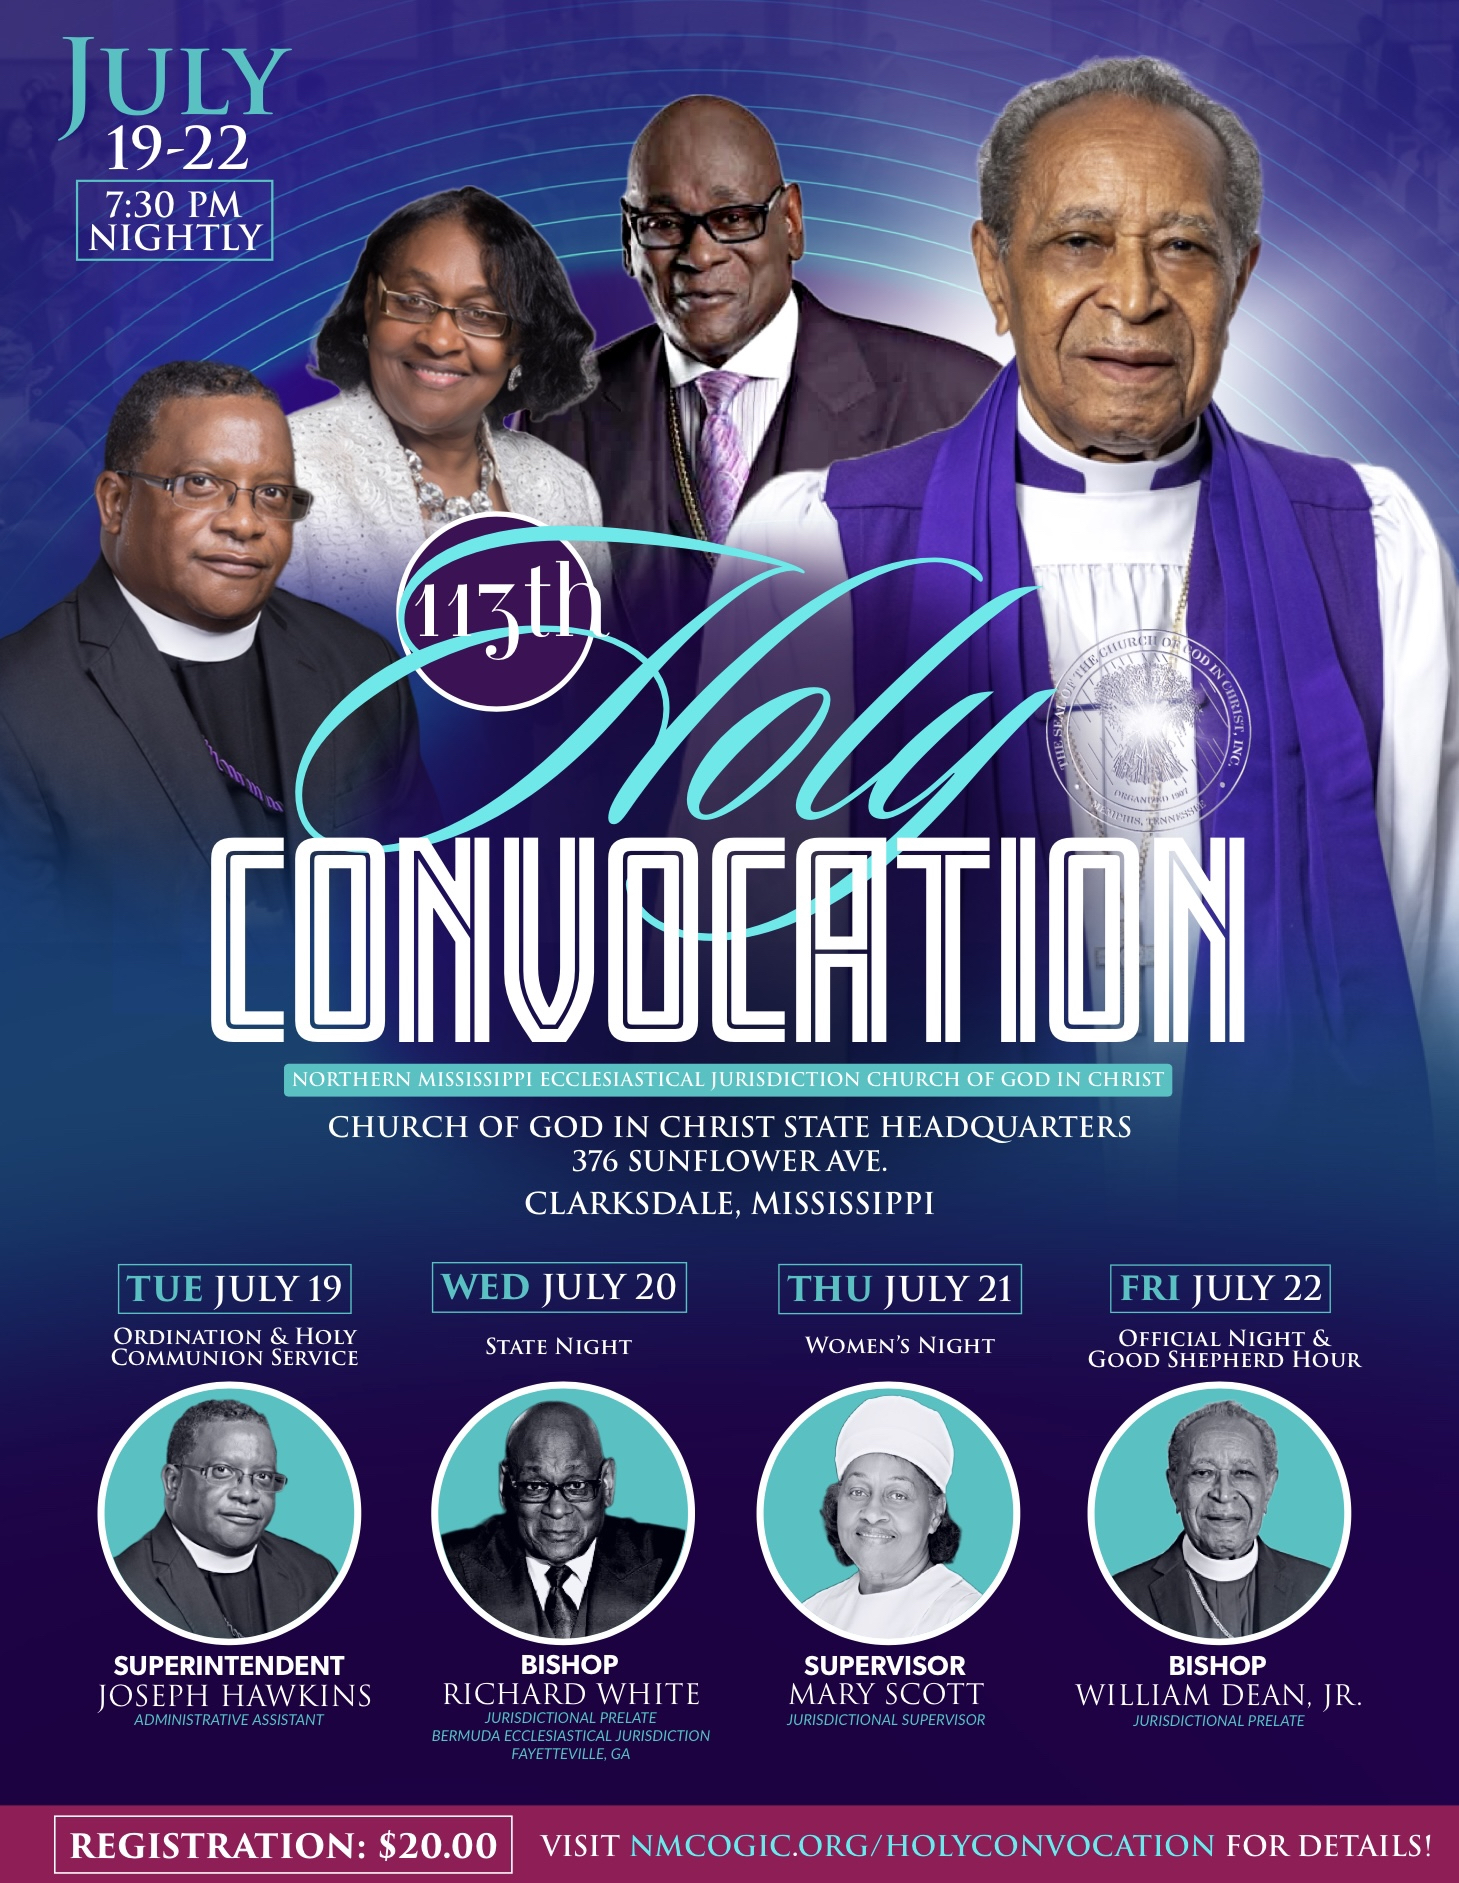 113th Holy Convocation Northern Mississippi Ecclesiastical